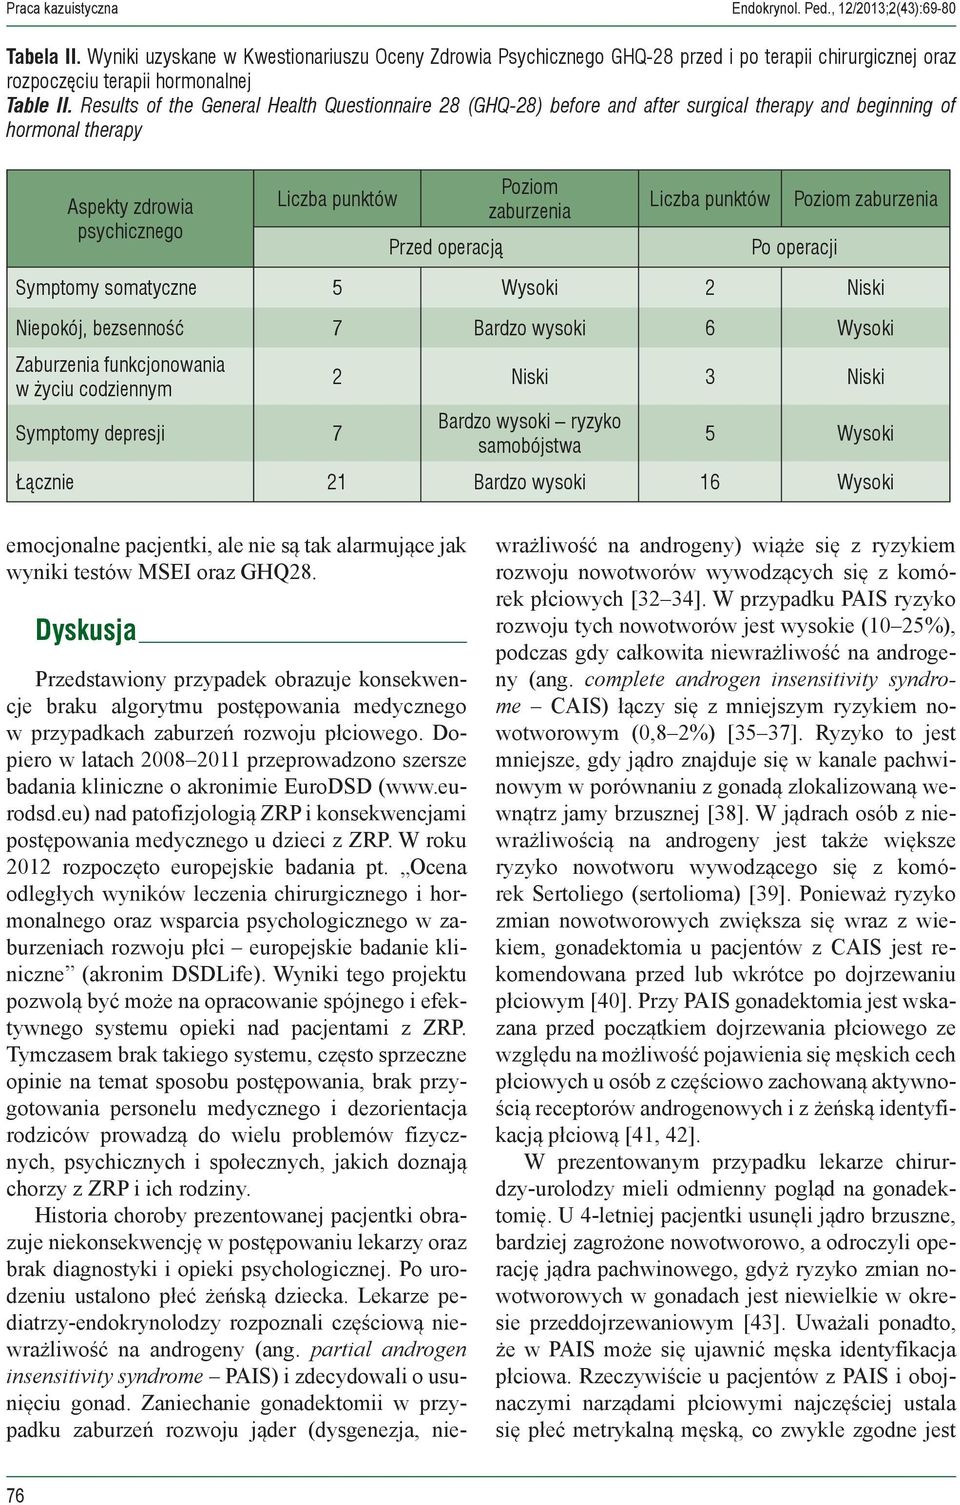 Results of the General Health Questionnaire 28 (GHQ-28) before and after surgical therapy and beginning of hormonal therapy Aspekty zdrowia psychicznego Liczba punktów Przed operacją Poziom